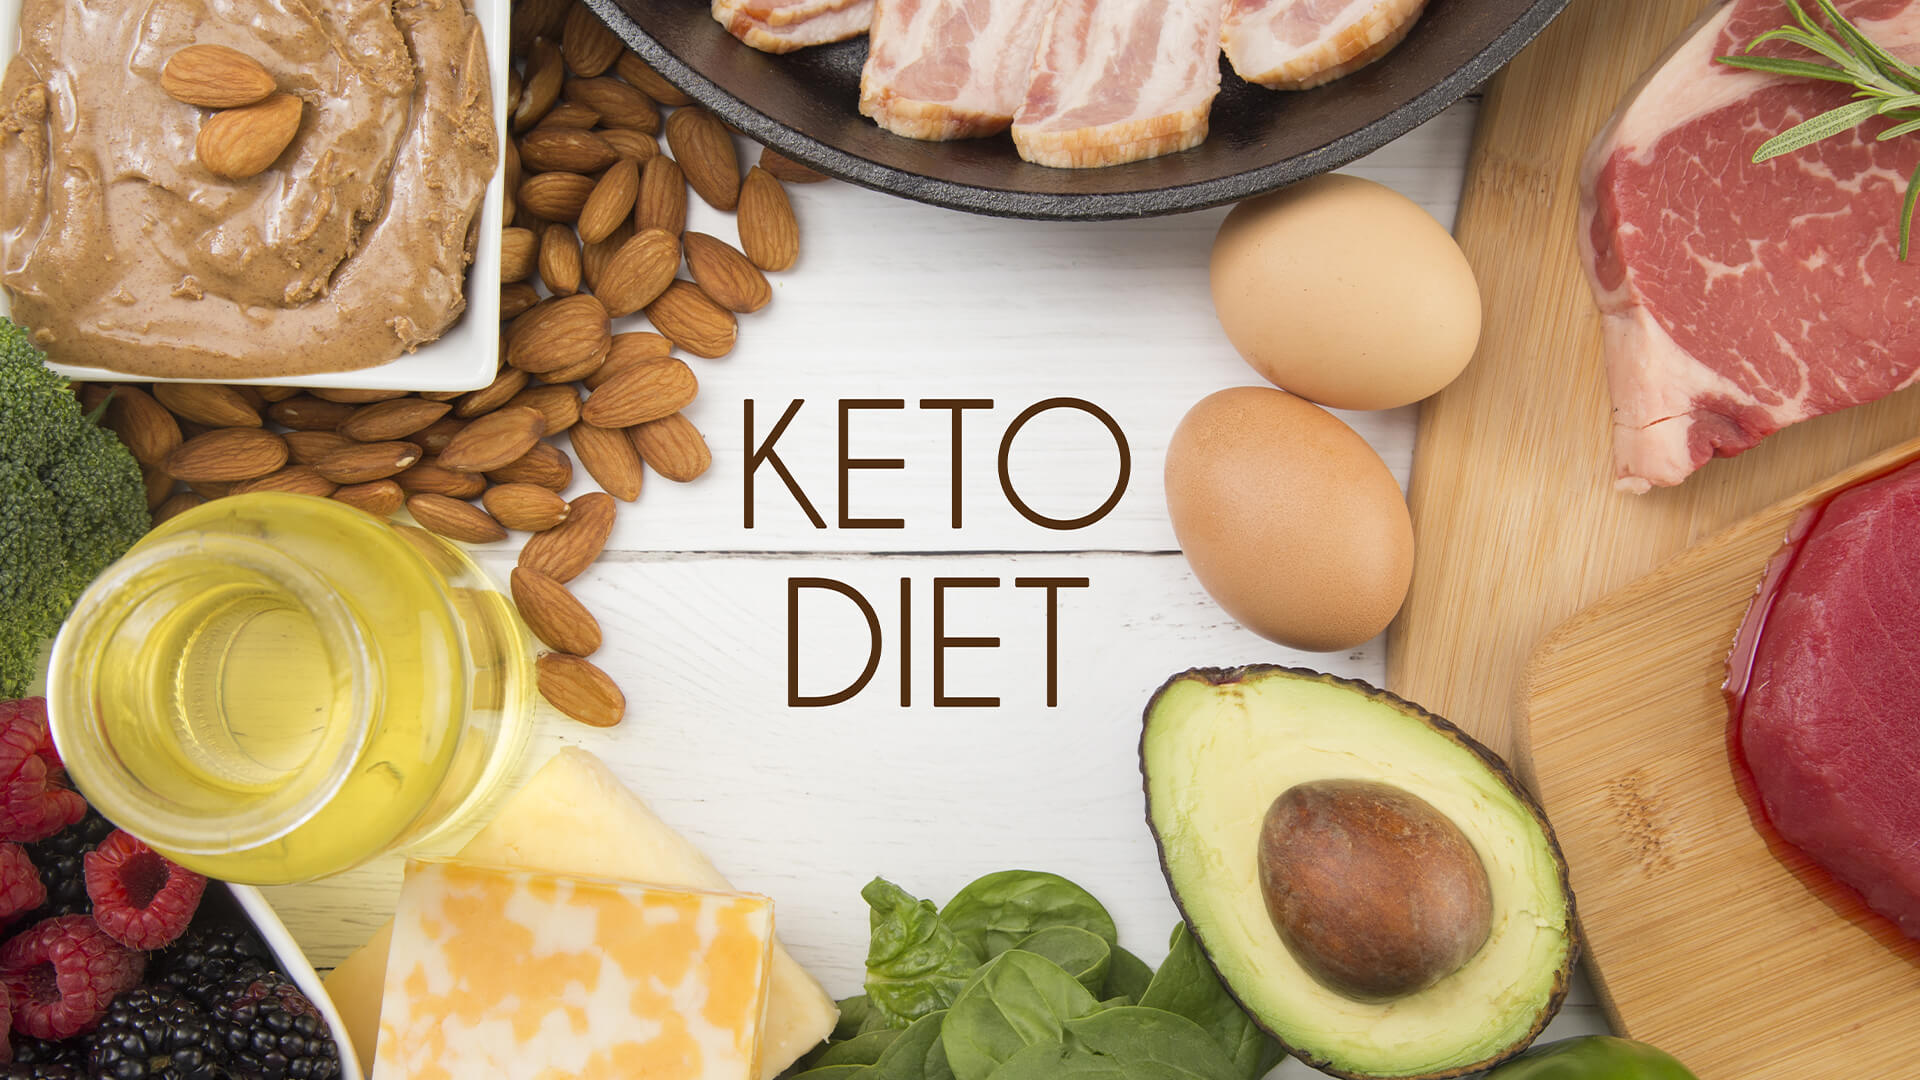 Five Things You May Not Know About the Keto Diet by Dr Michael Mosley - GHP  News